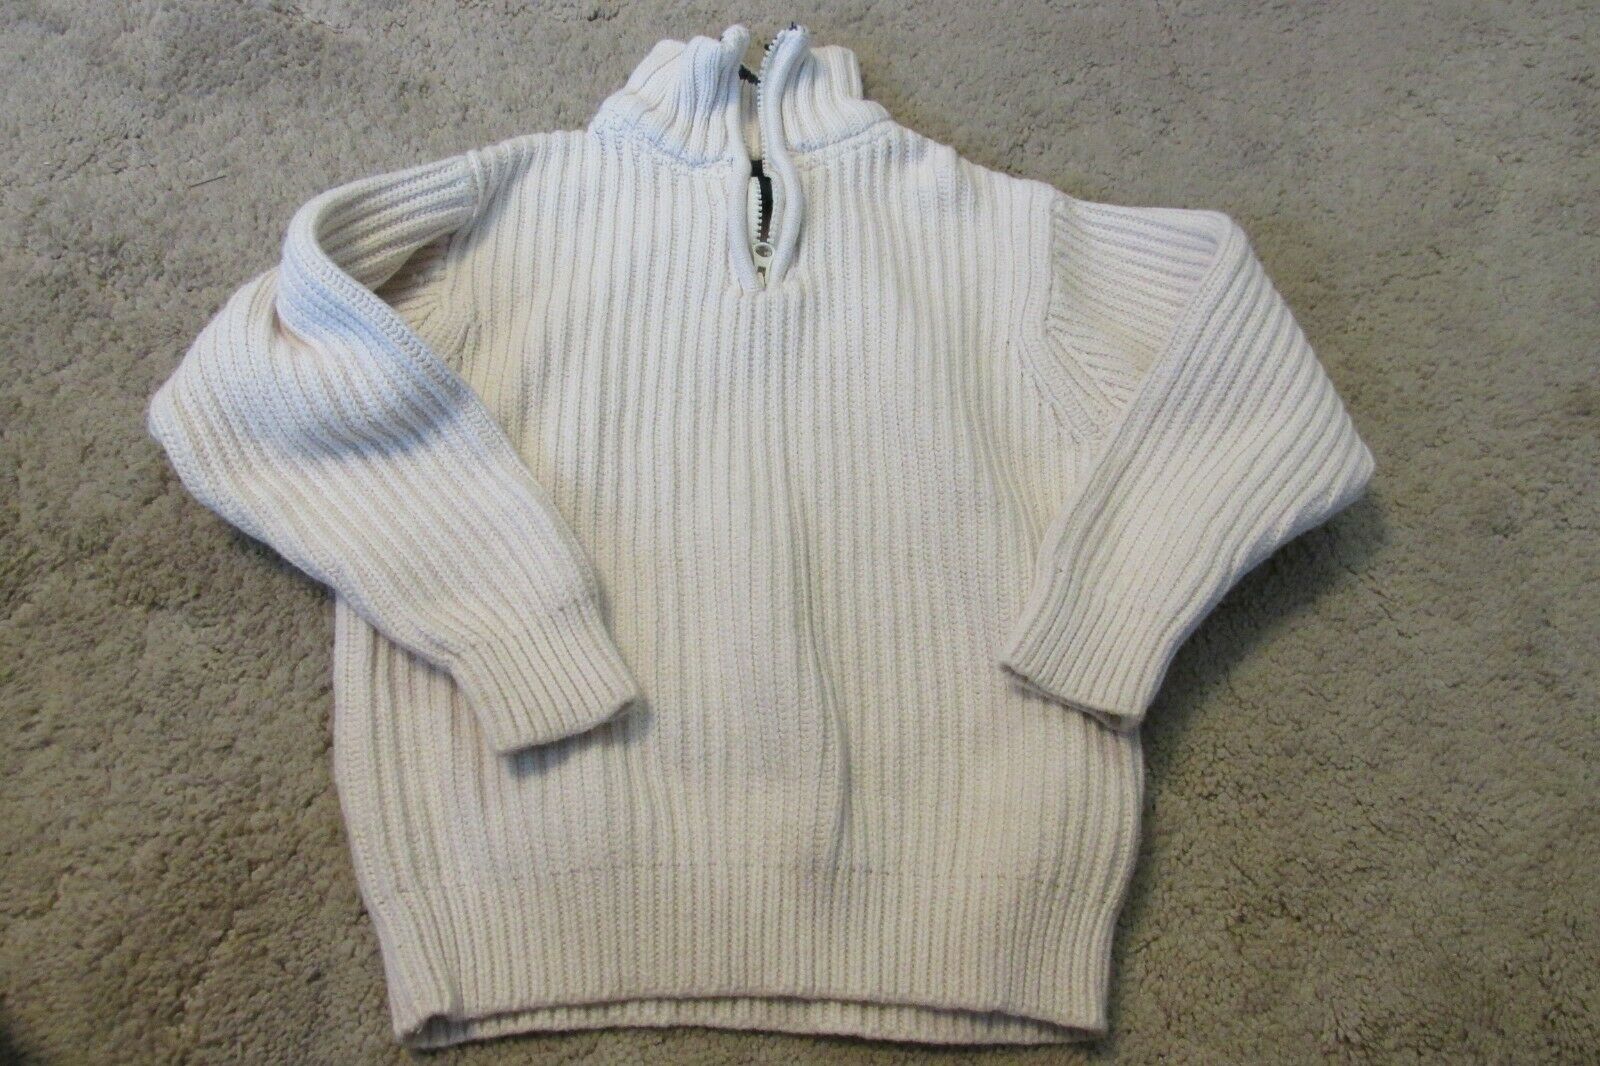 Boy's Or Girl's Gap Kids Large Knit Ivory Sweater With Short Zipper Size S (5-6)